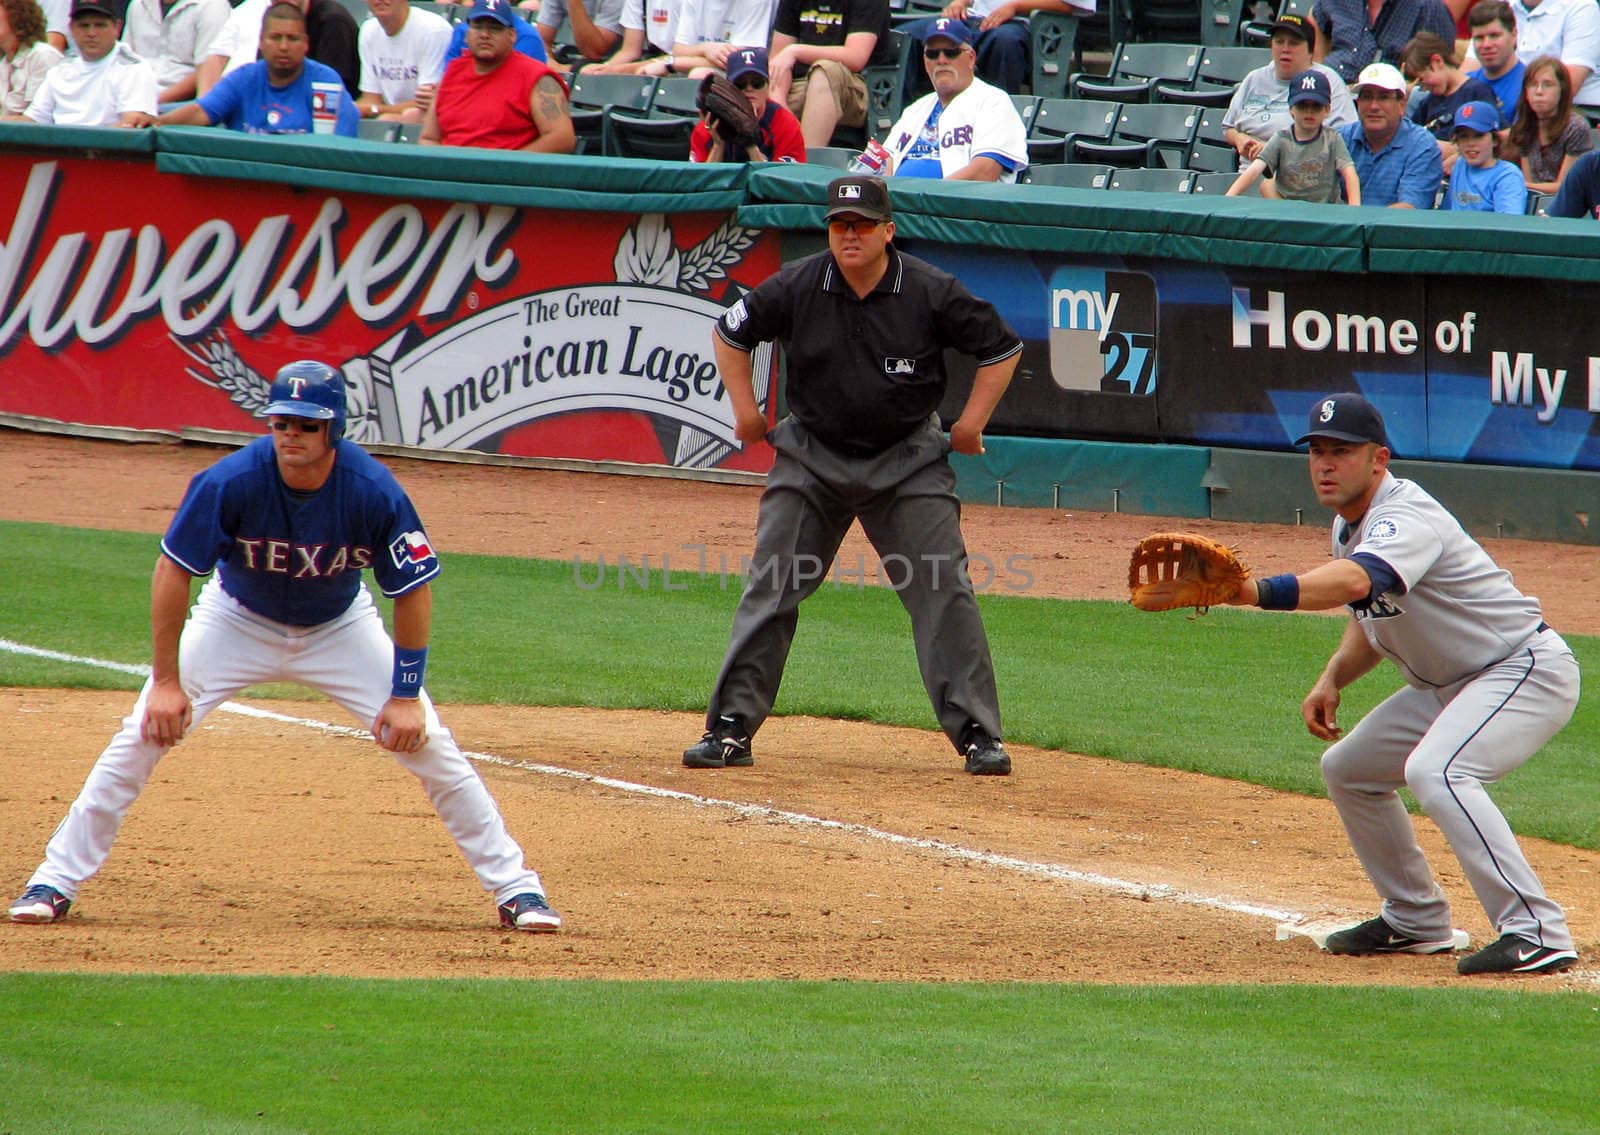 A view of the first base runner, first baseman and umpire at a professional baseball game.
